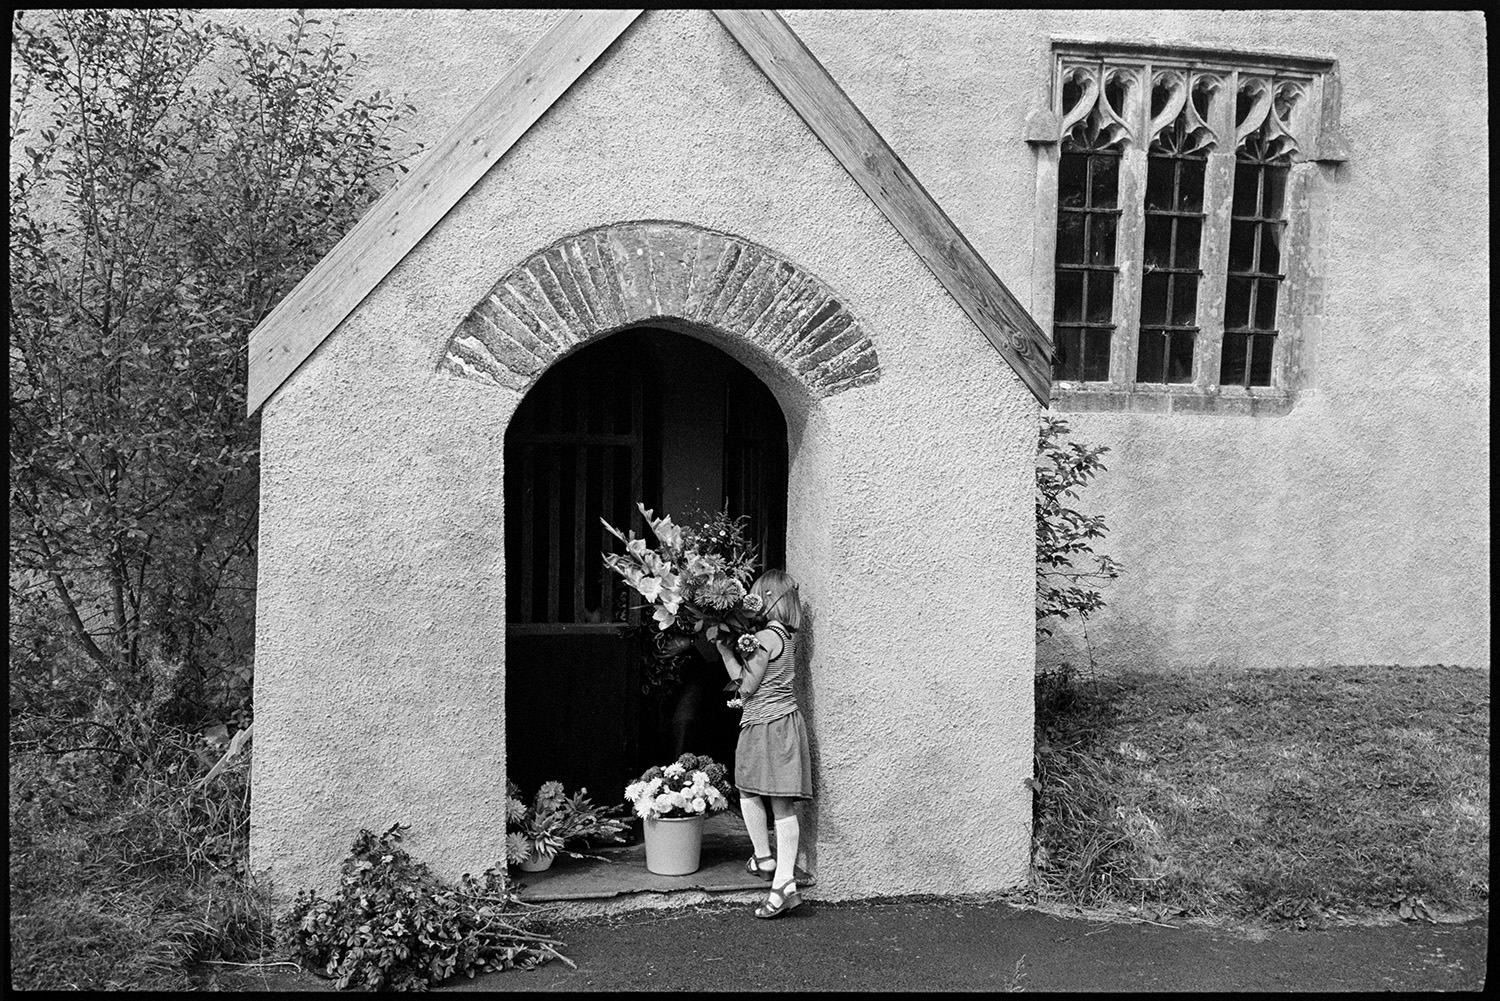 Women decorating church for Harvest Festival, flowers.
[A girl in the porch at Dowland Church carrying a big bouquet of flowers for the Harvest Festival decorations. A bucket with flowers and a pile of foliage are at the church entrance.]